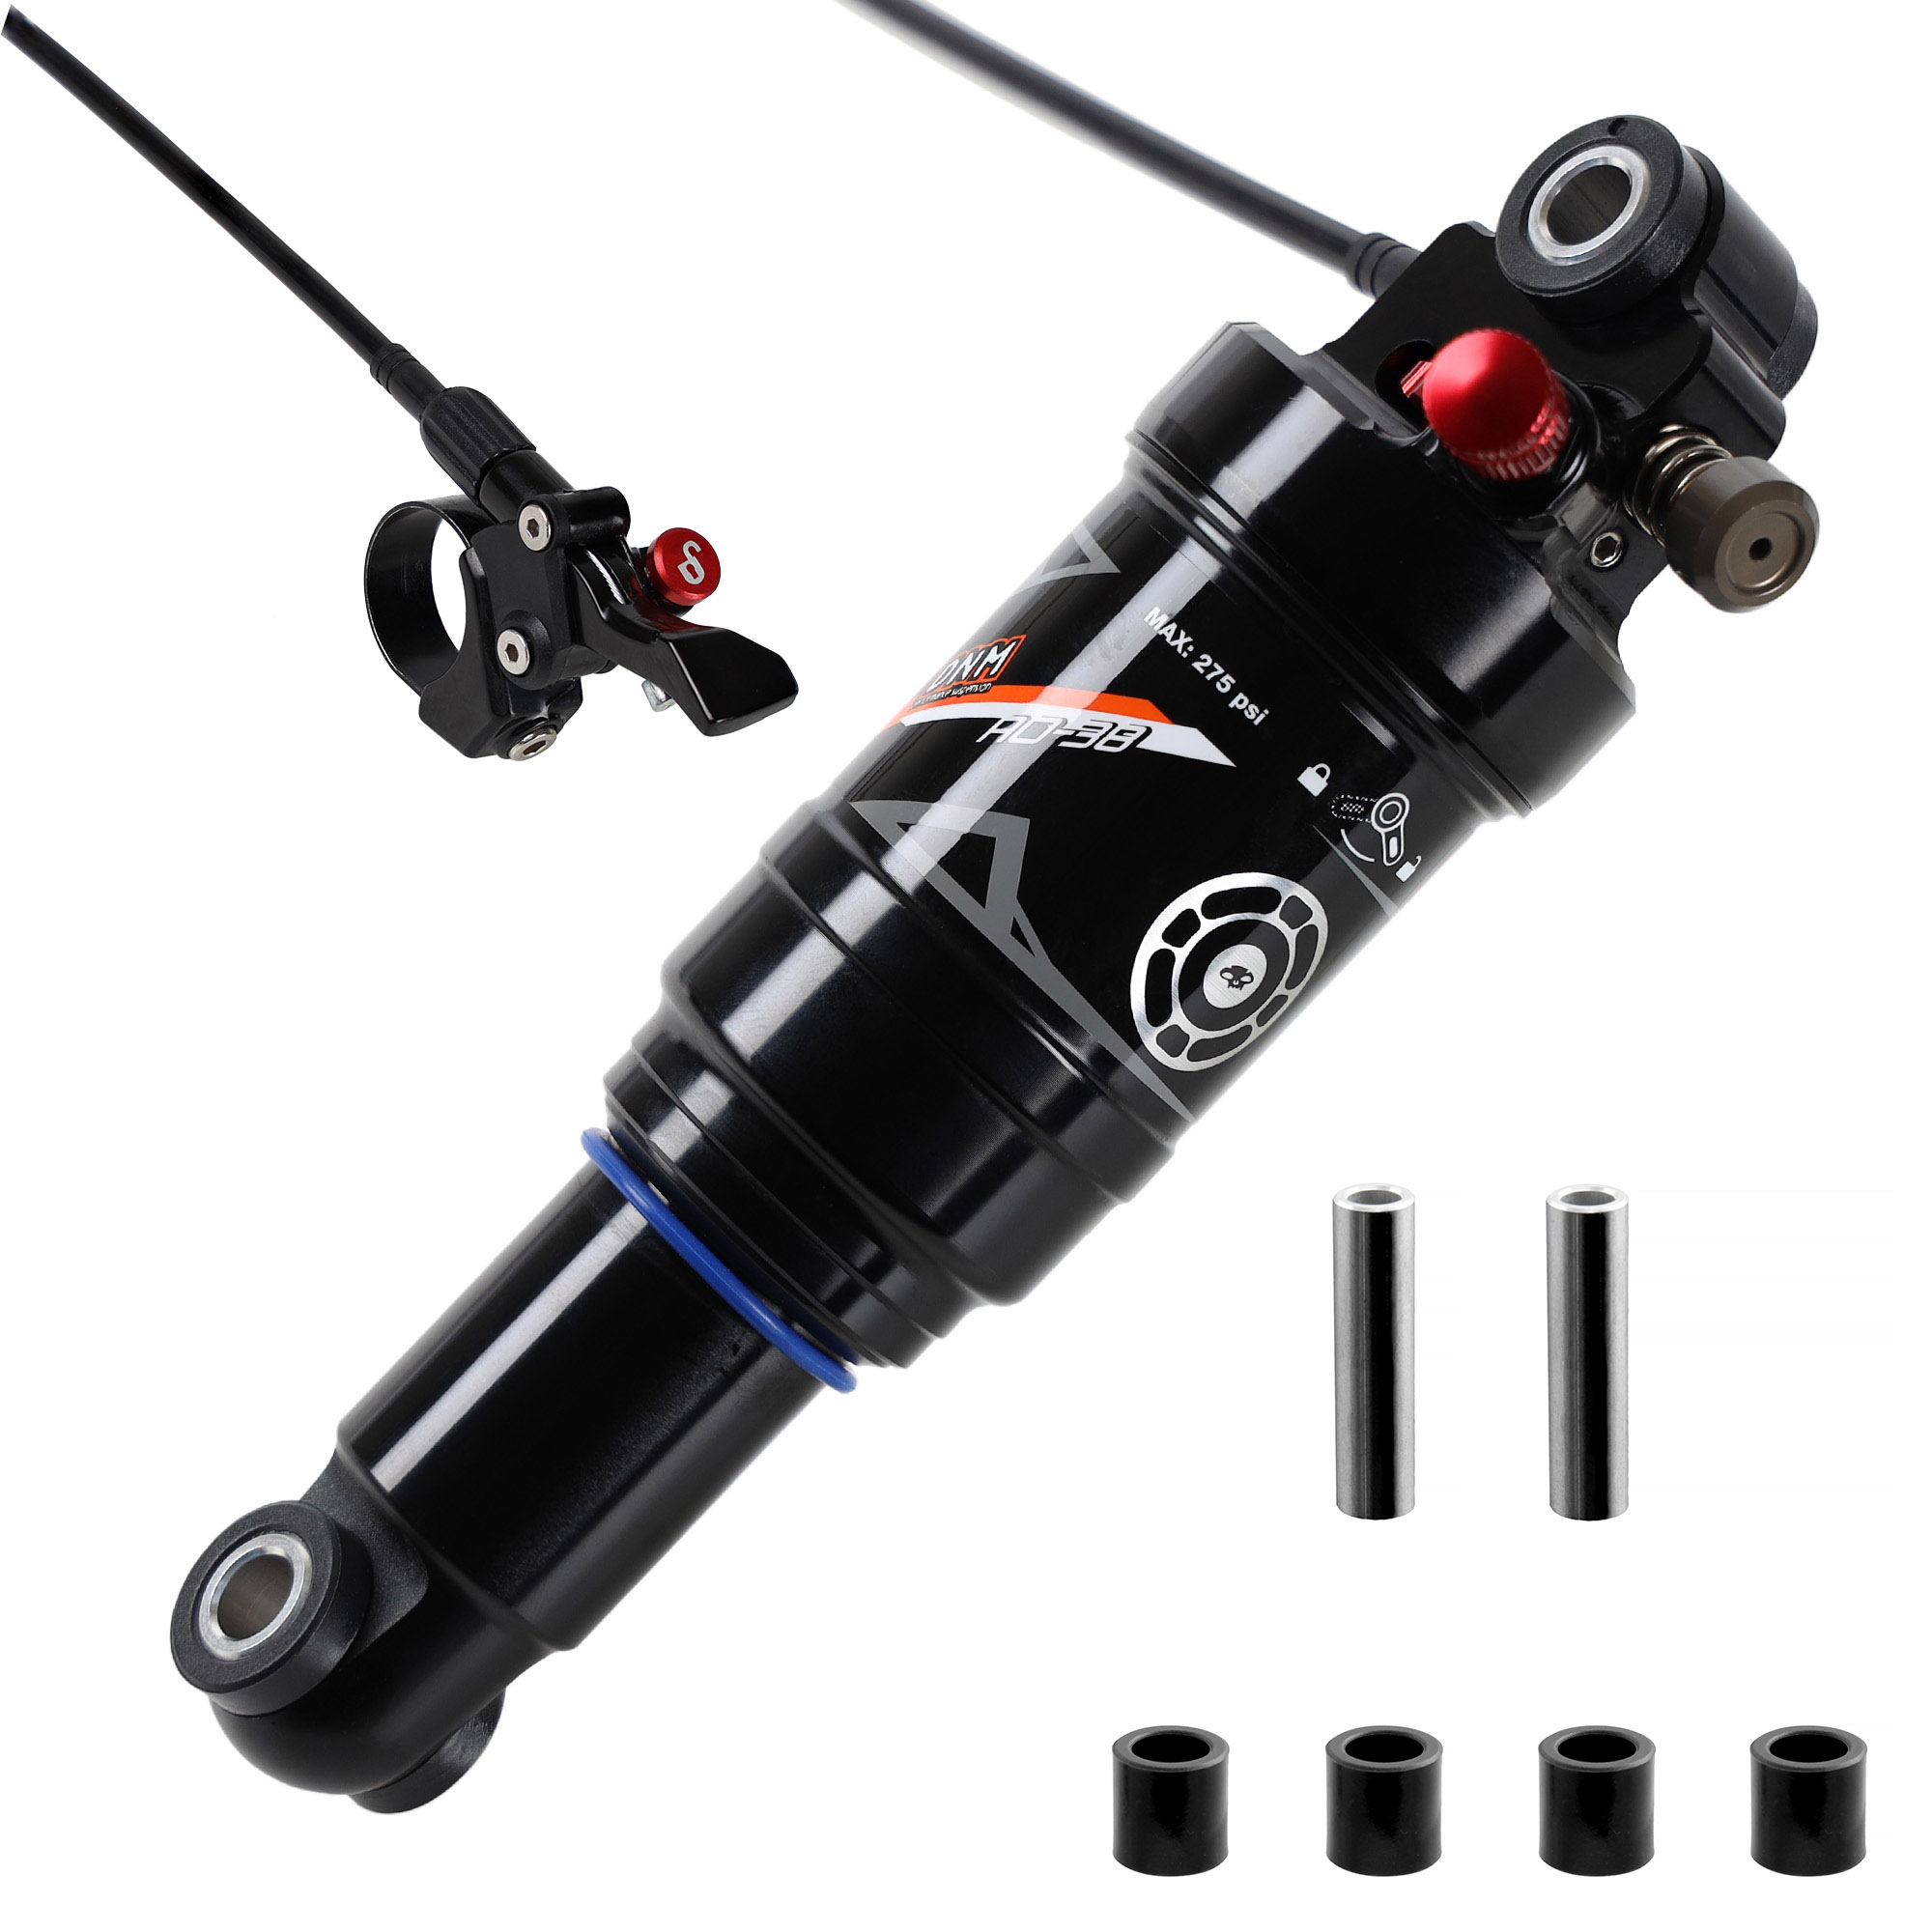 DNM AO-38RL Mountain Bike Air Rear Shock With Remote Lockout 152mm Travel 28mm